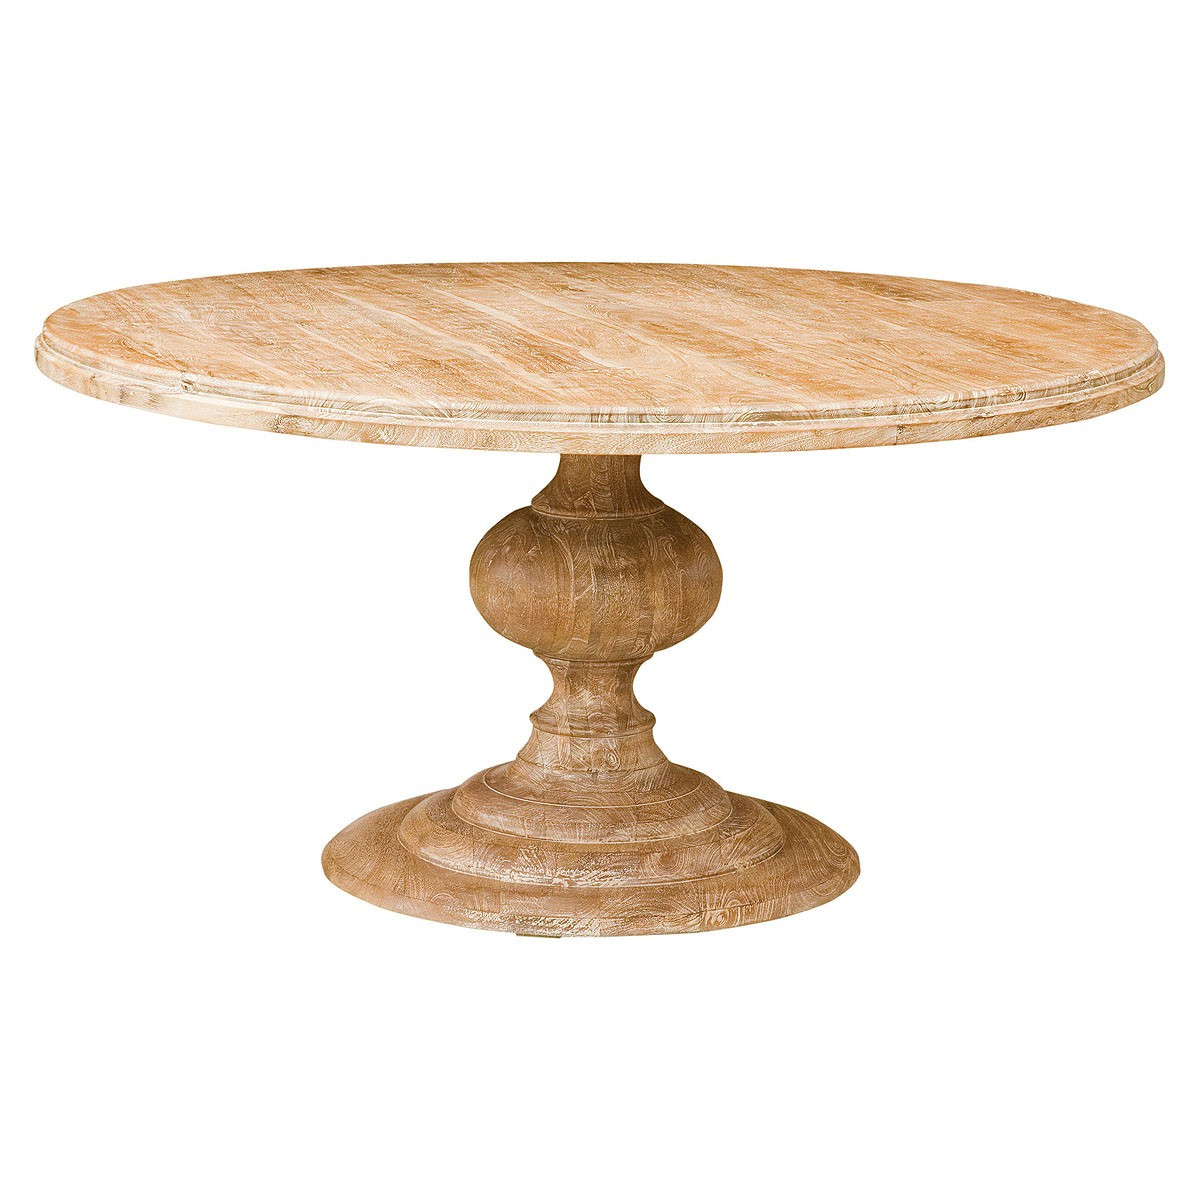 60" Round Pedestal Dining Table in Whitewash | Wood Round Dining Table